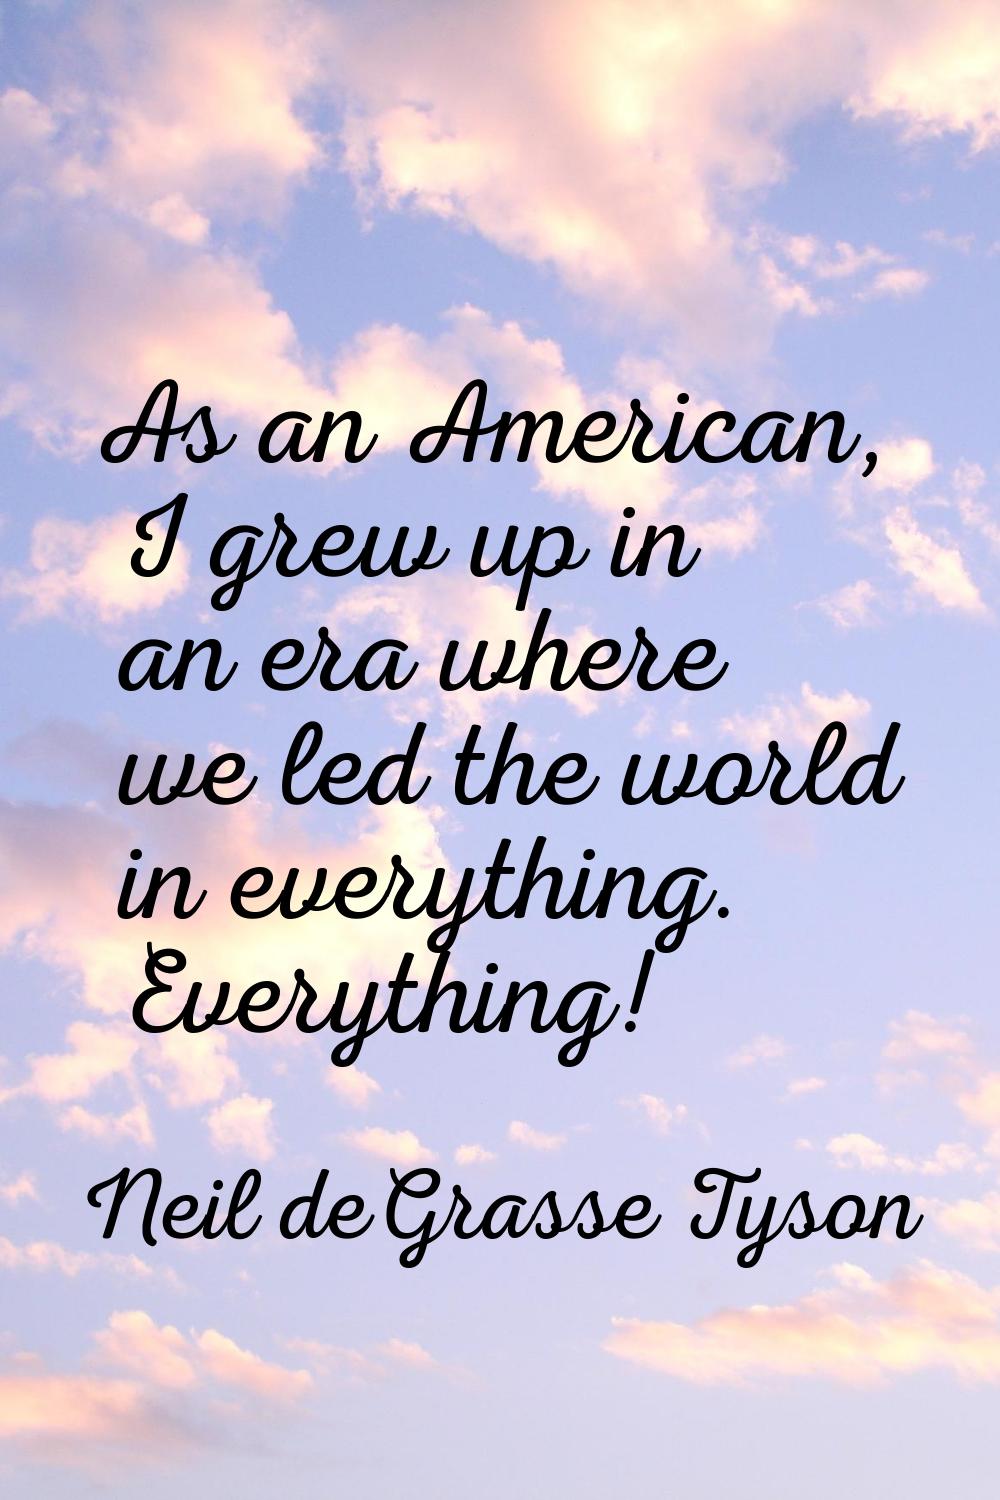 As an American, I grew up in an era where we led the world in everything. Everything!